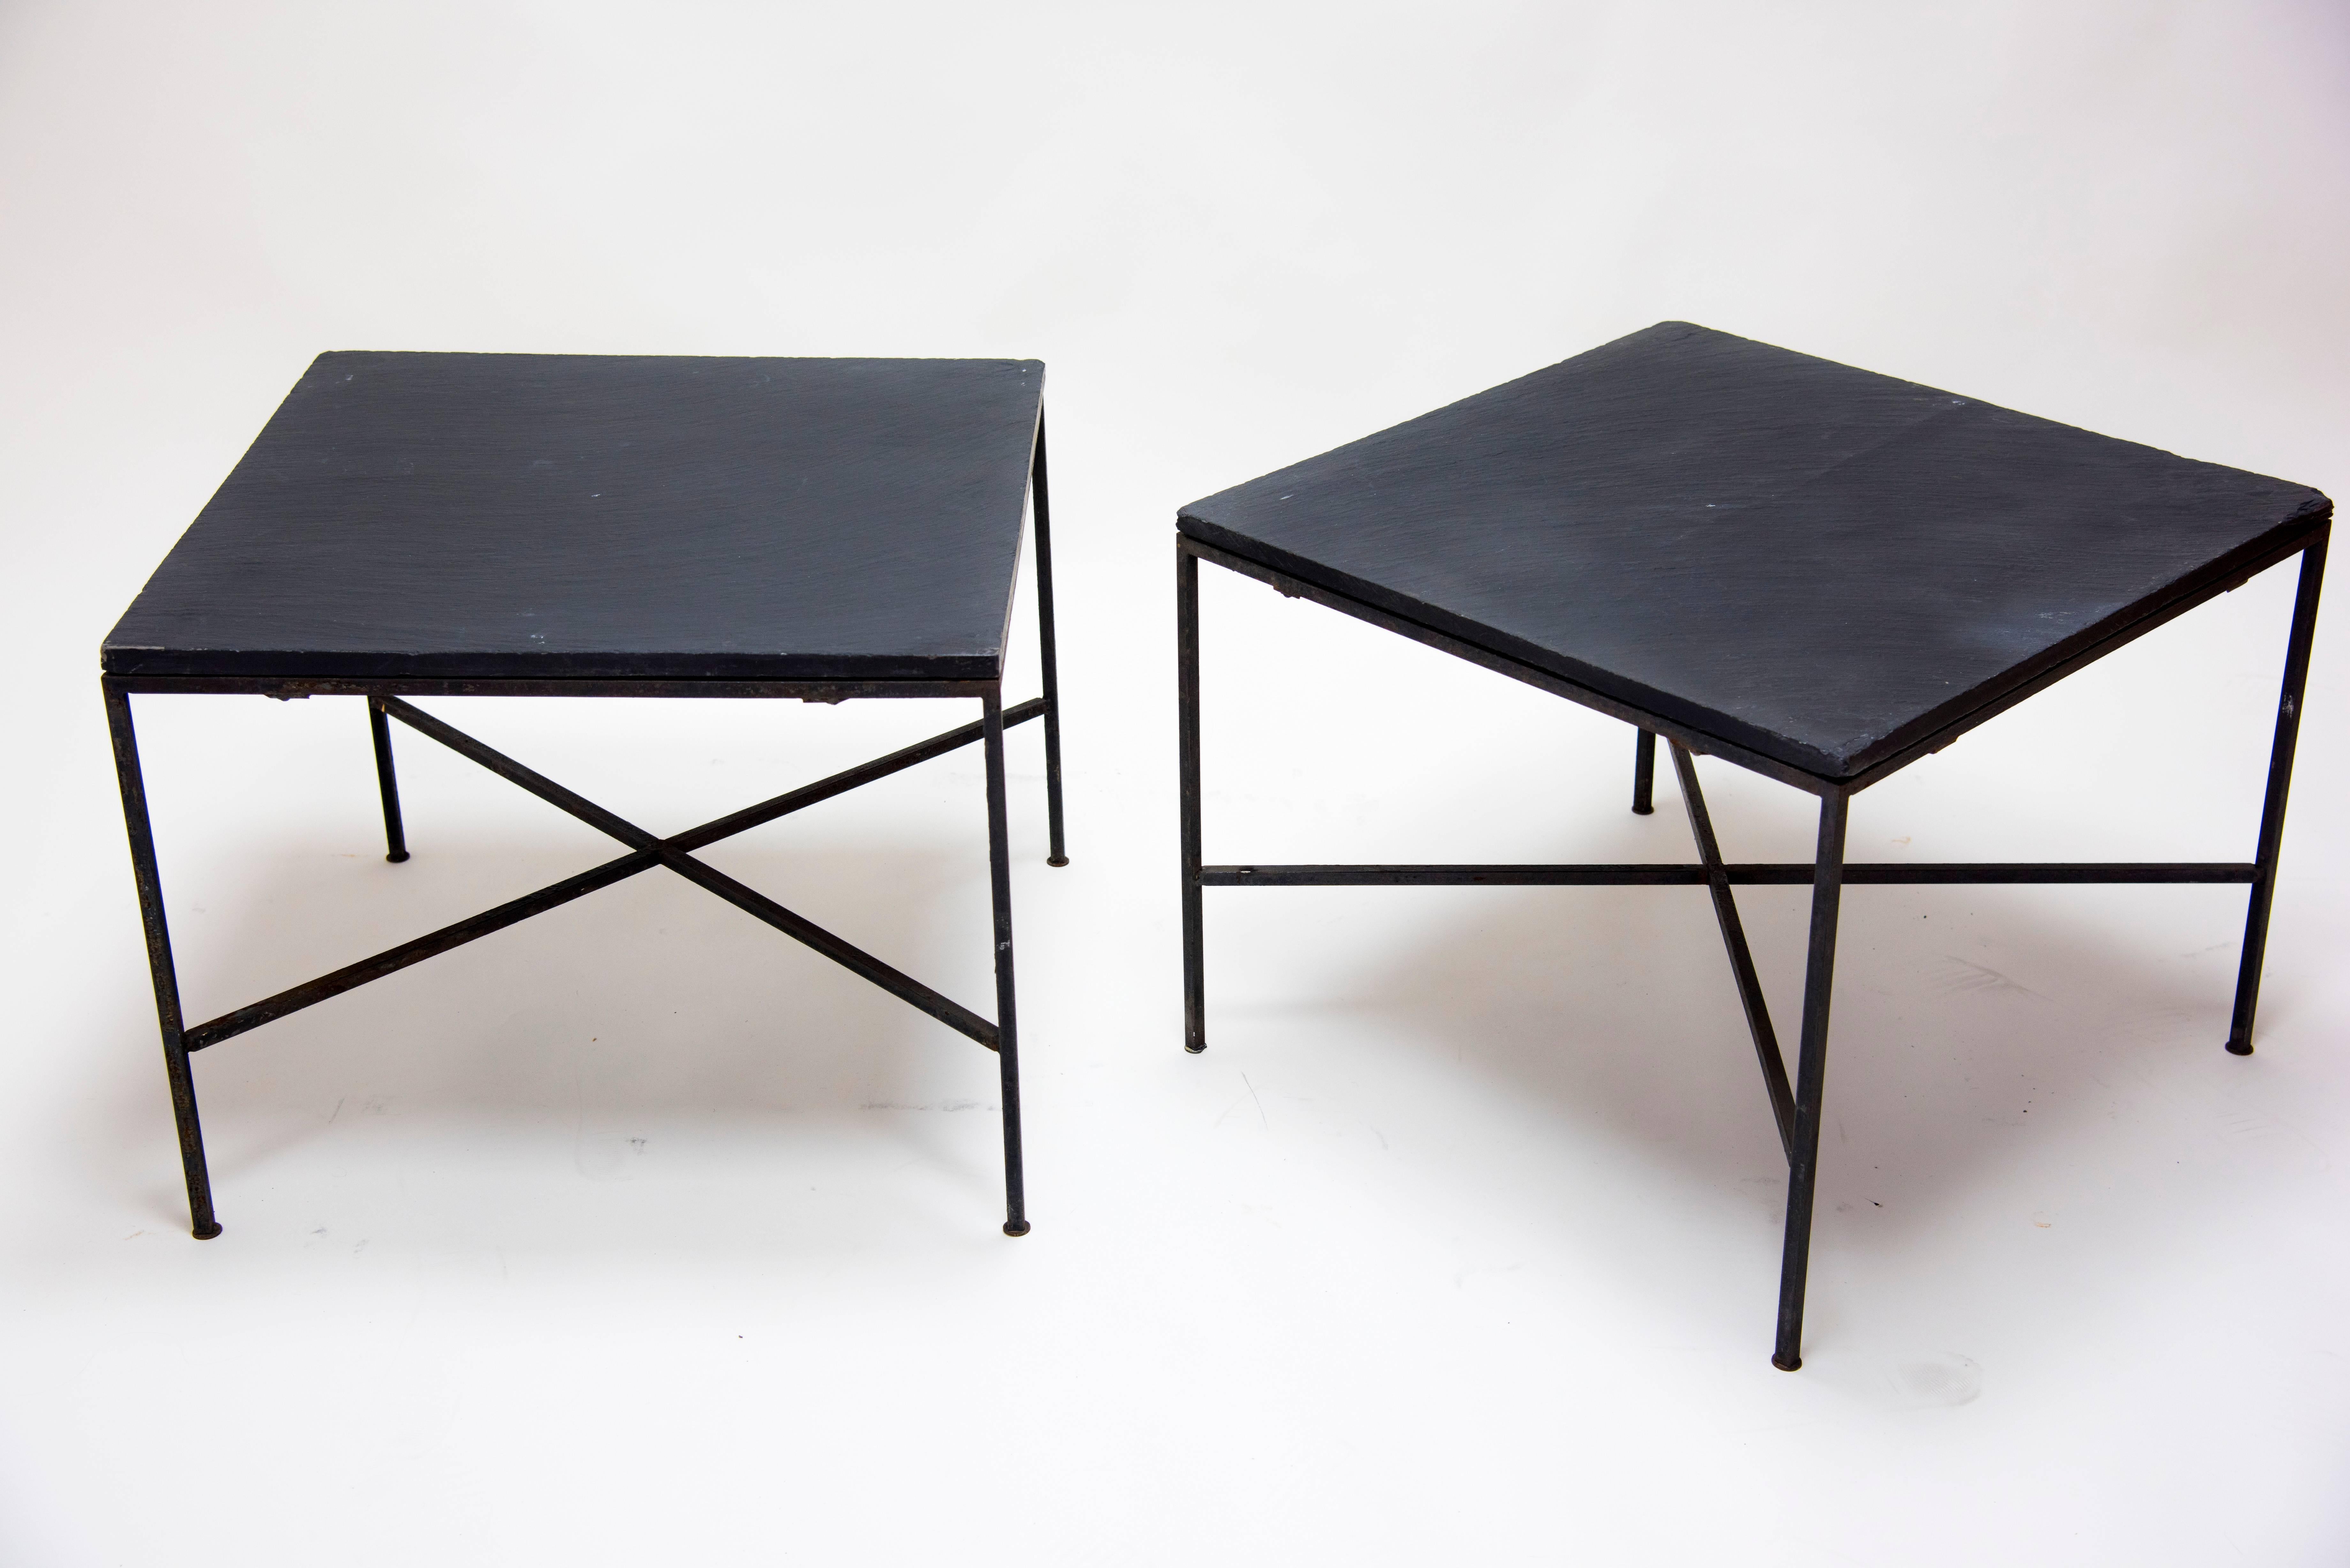 Pair of Mid-Century Modern end tables with clean lined iron base with X-form stretchers and dark slate tops. Appropriate for indoor or outdoor use.